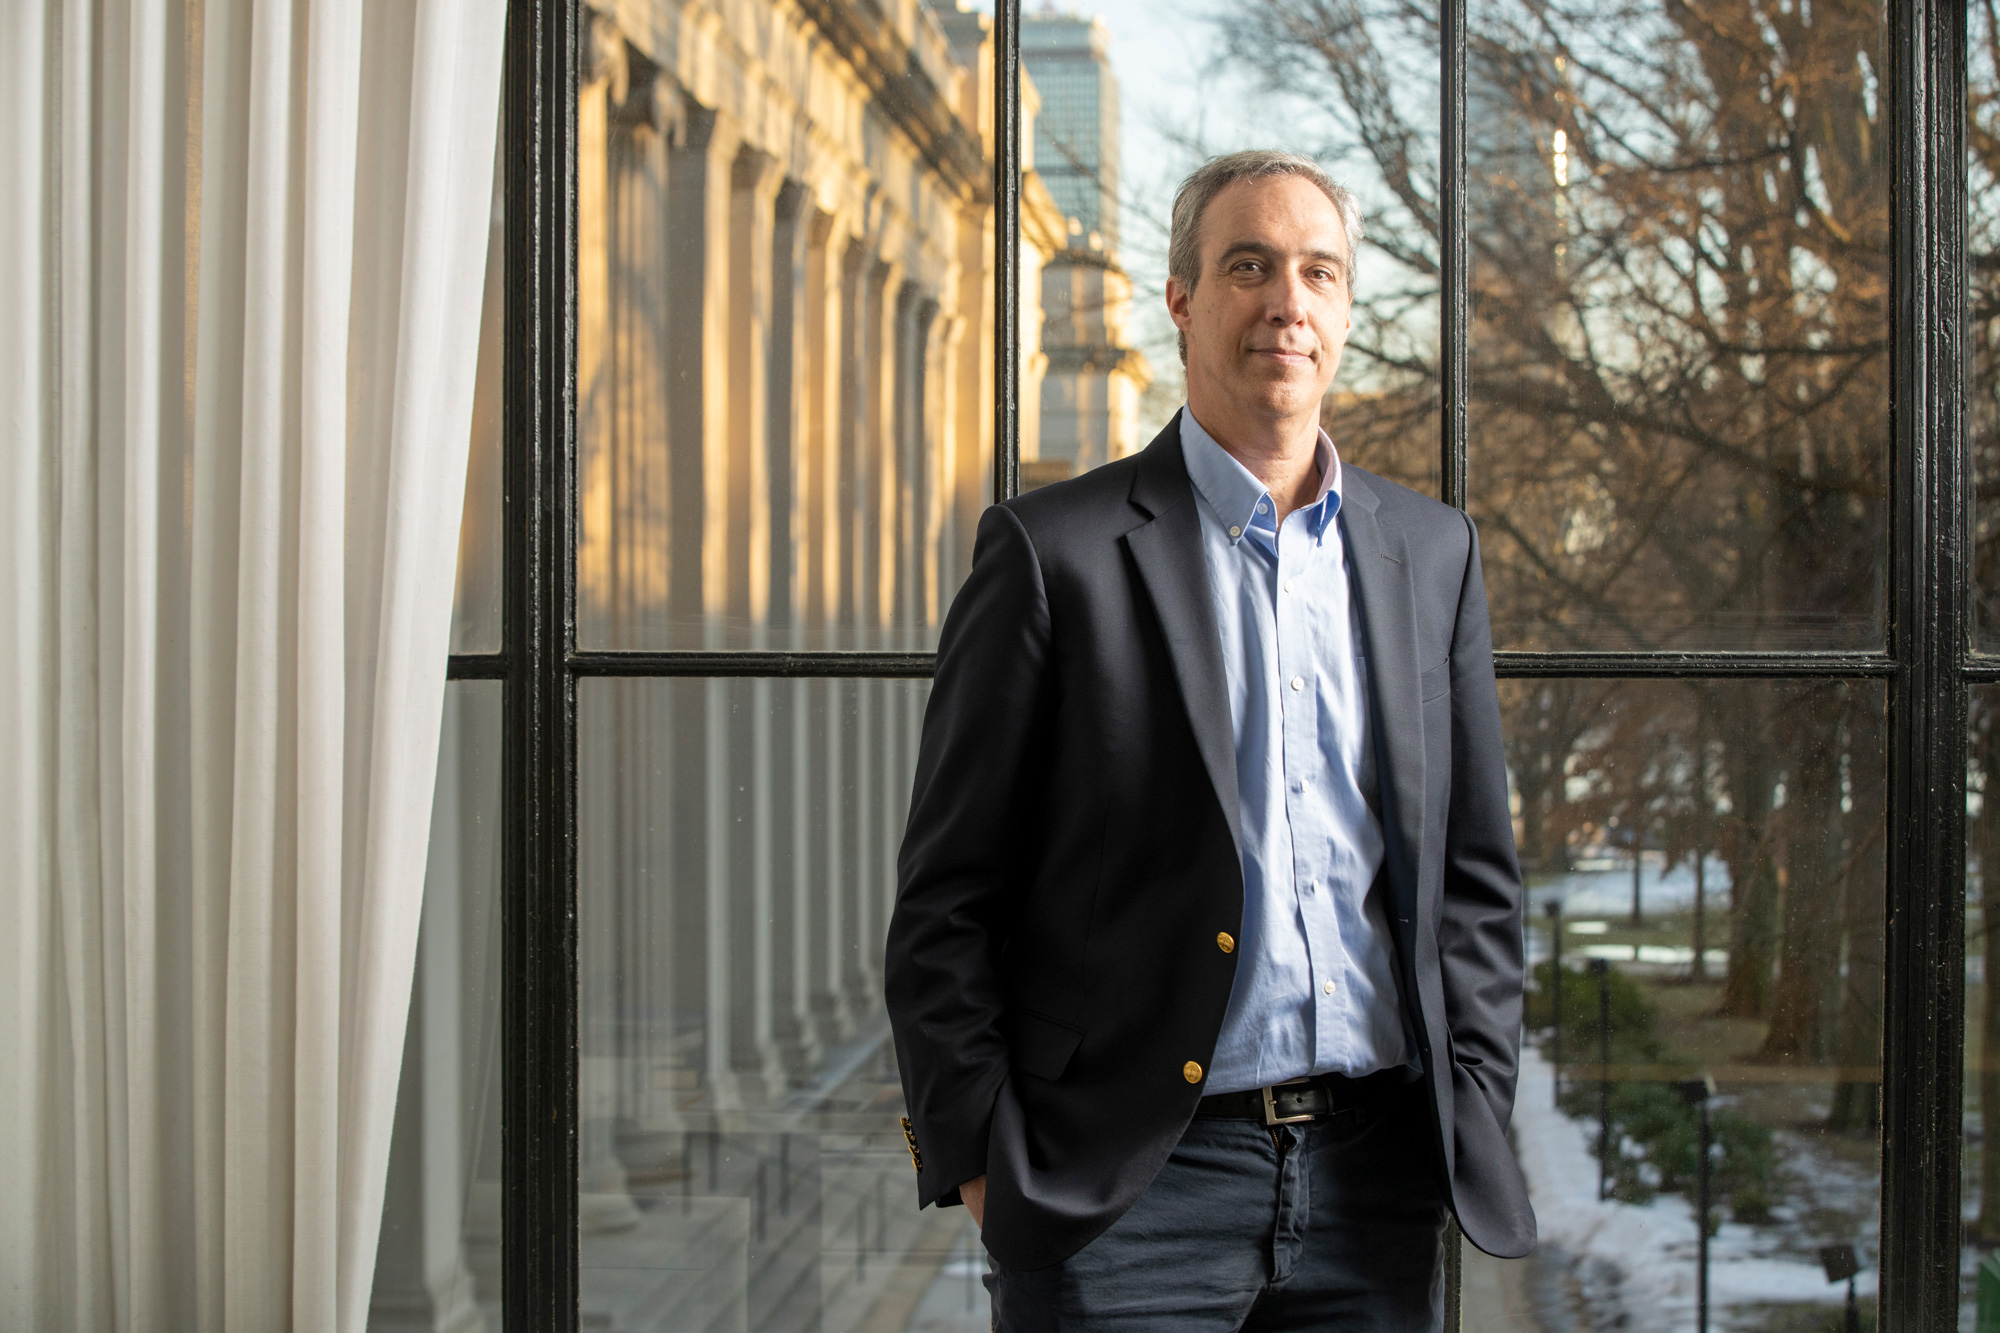 Dan Huttenlocher, inaugural dean of the MIT Schwarzman College of Computing, has been focused on bridging gaps between disciplines since he first became interested in the nascent field of artificial intelligence as a teenager.